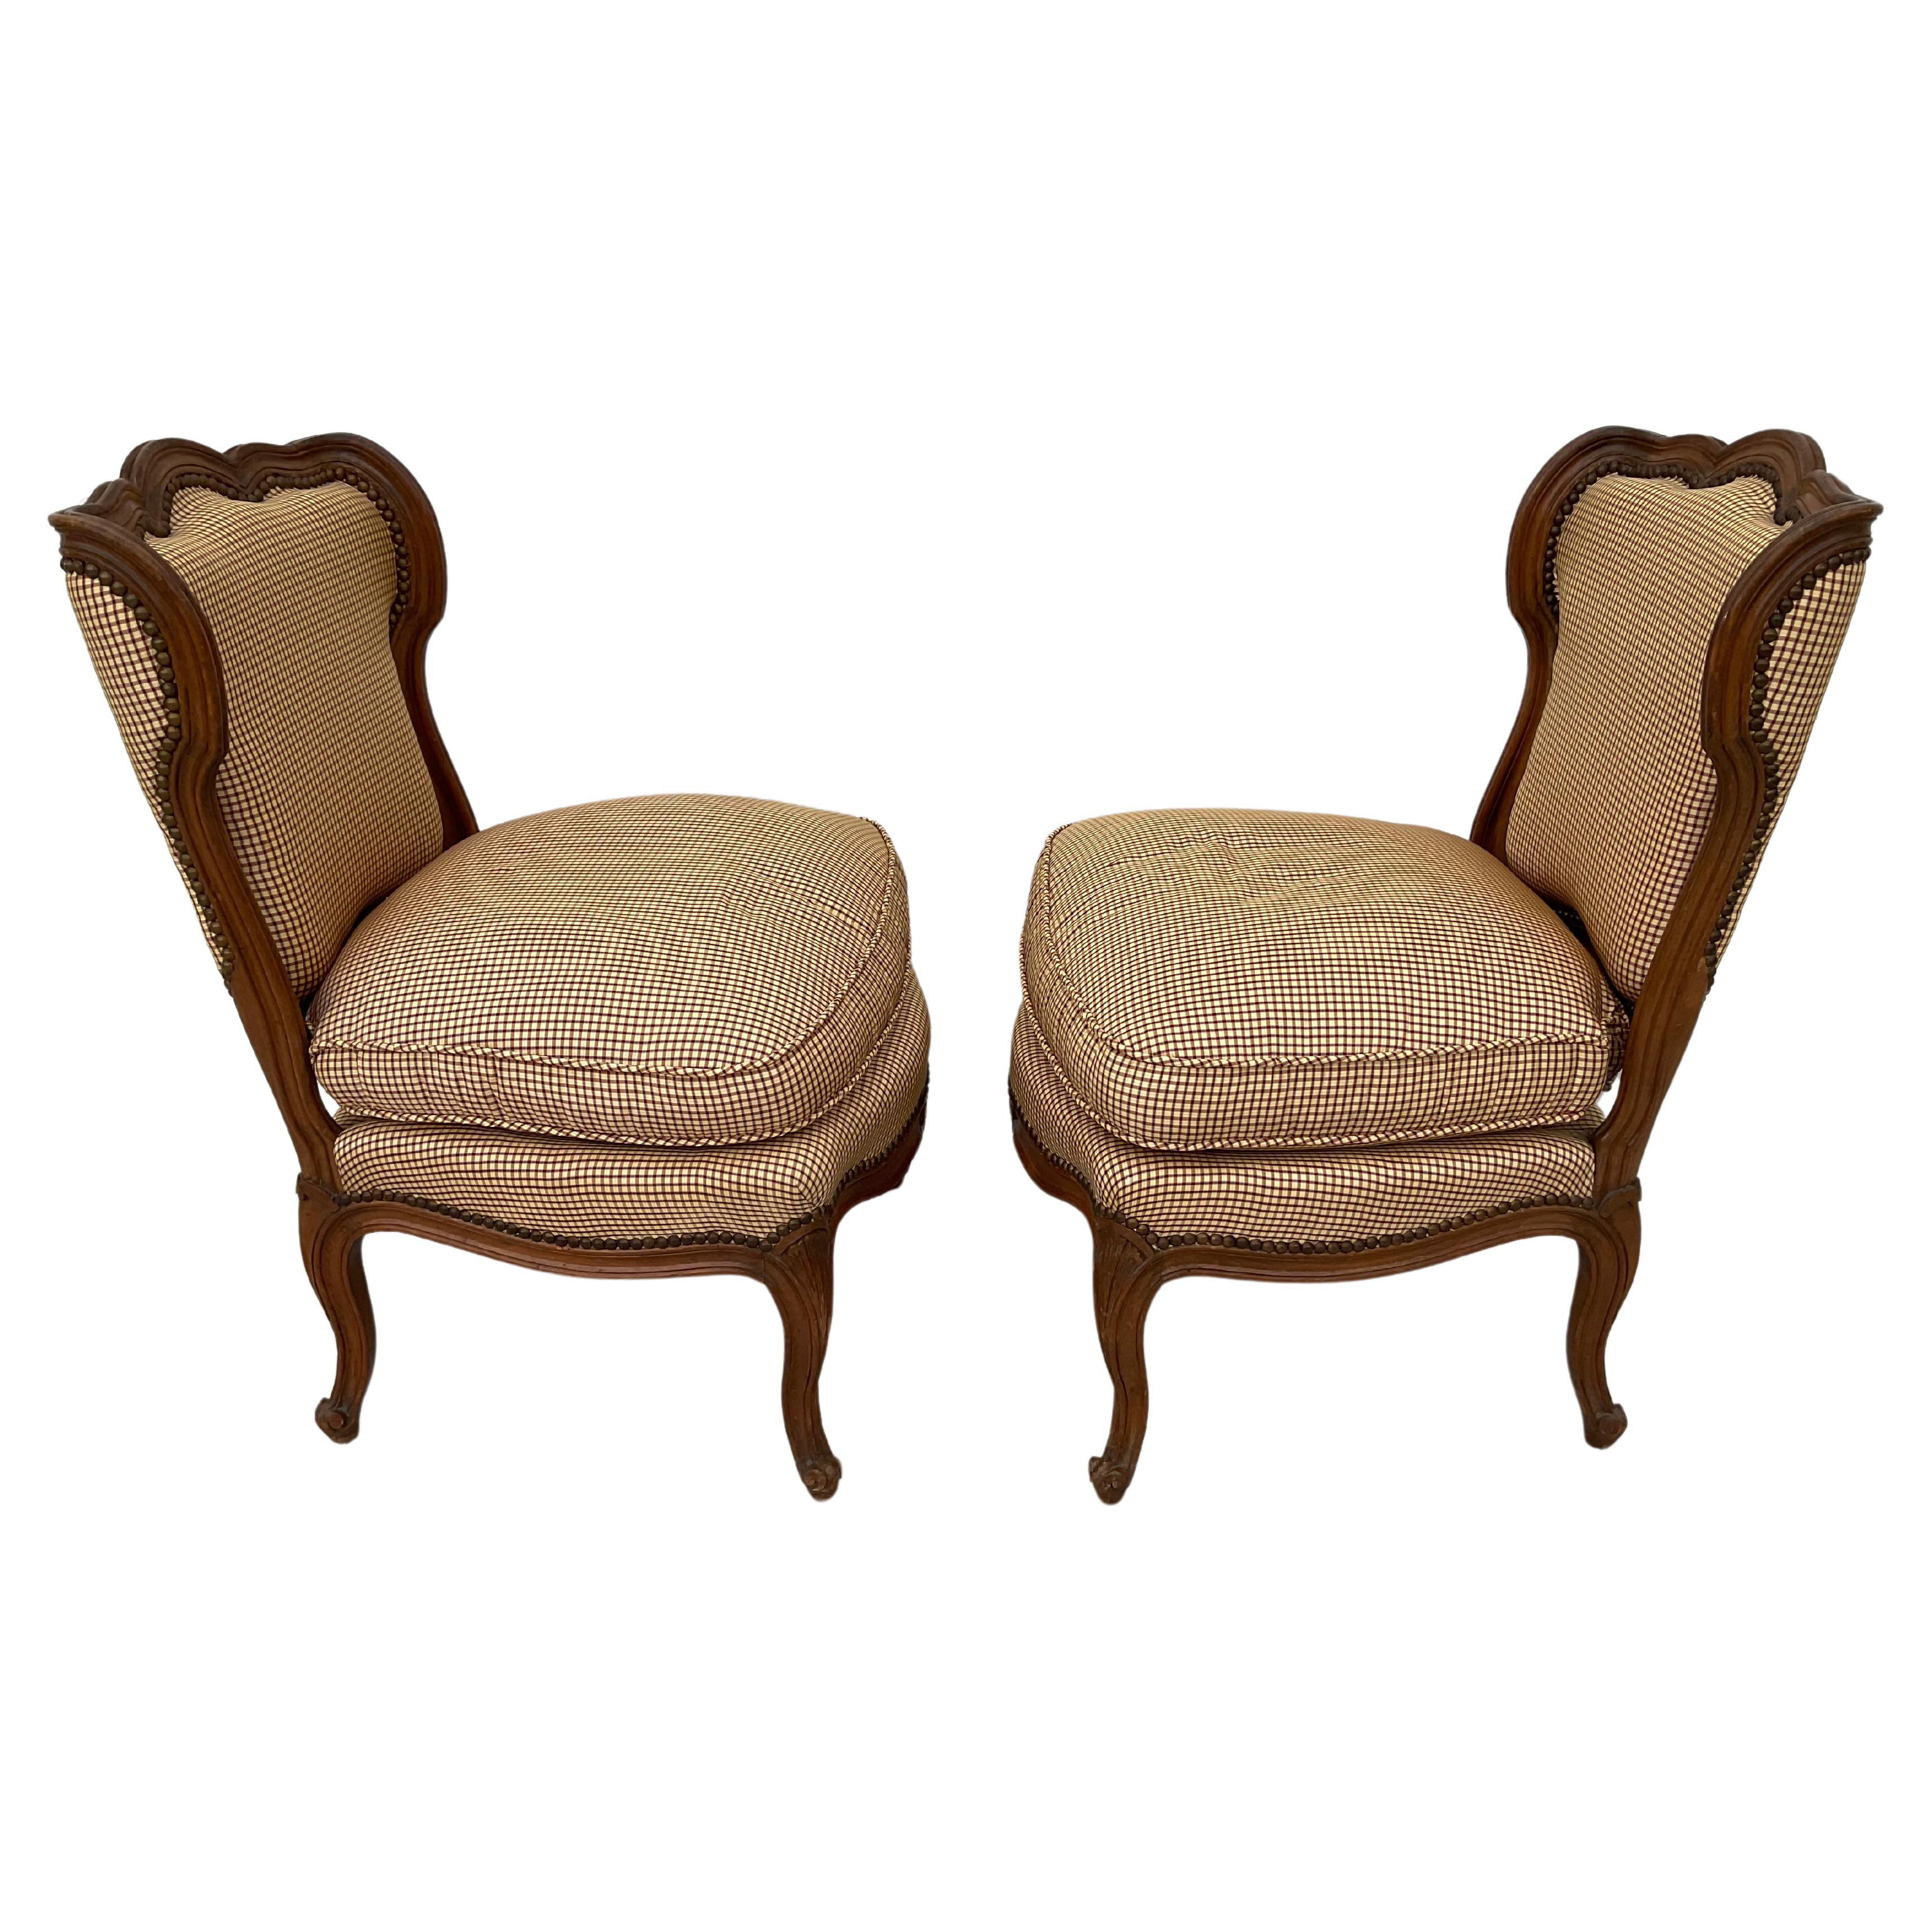 Pair of French country slipper chairs with wide comfortable seats. Upholstered chairs have beautifully shaped backs and are raised on scrolled cabriole legs. Upholstery is in a small brown and cream check. Versatile chairs can be used in any room or